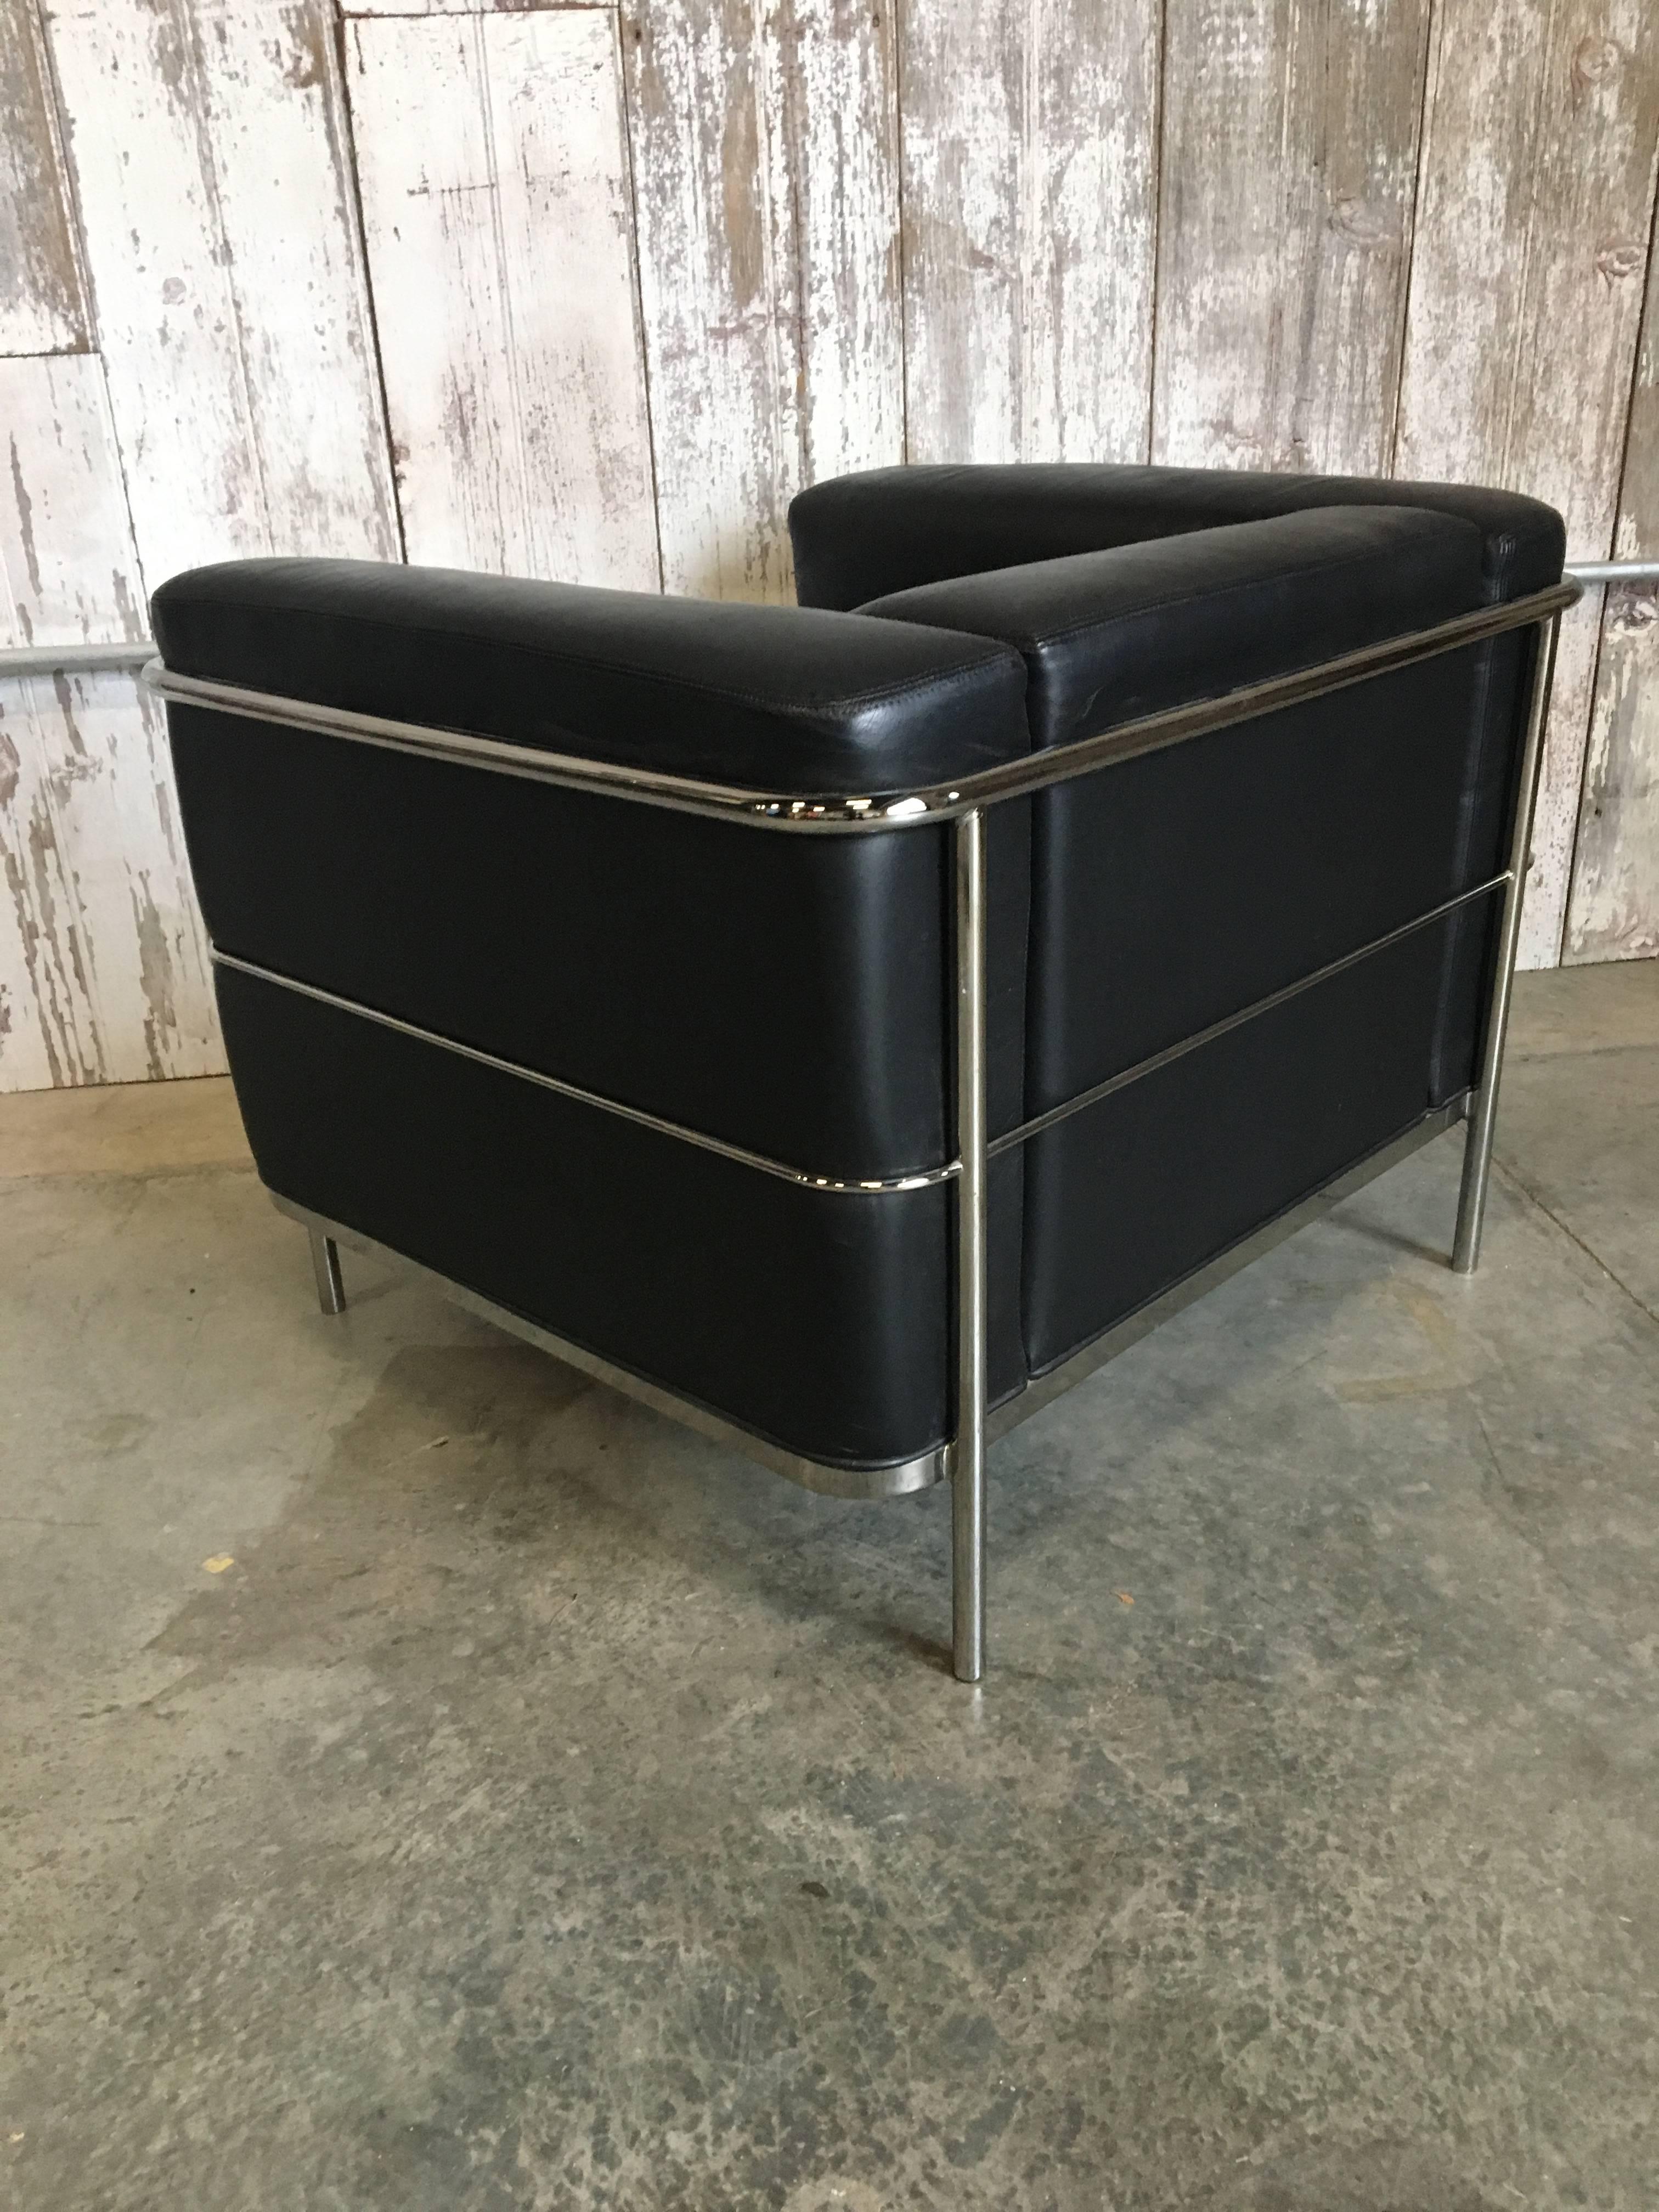 20th Century Pair of Lounge Chairs by Jack Cartwright In Black Leather